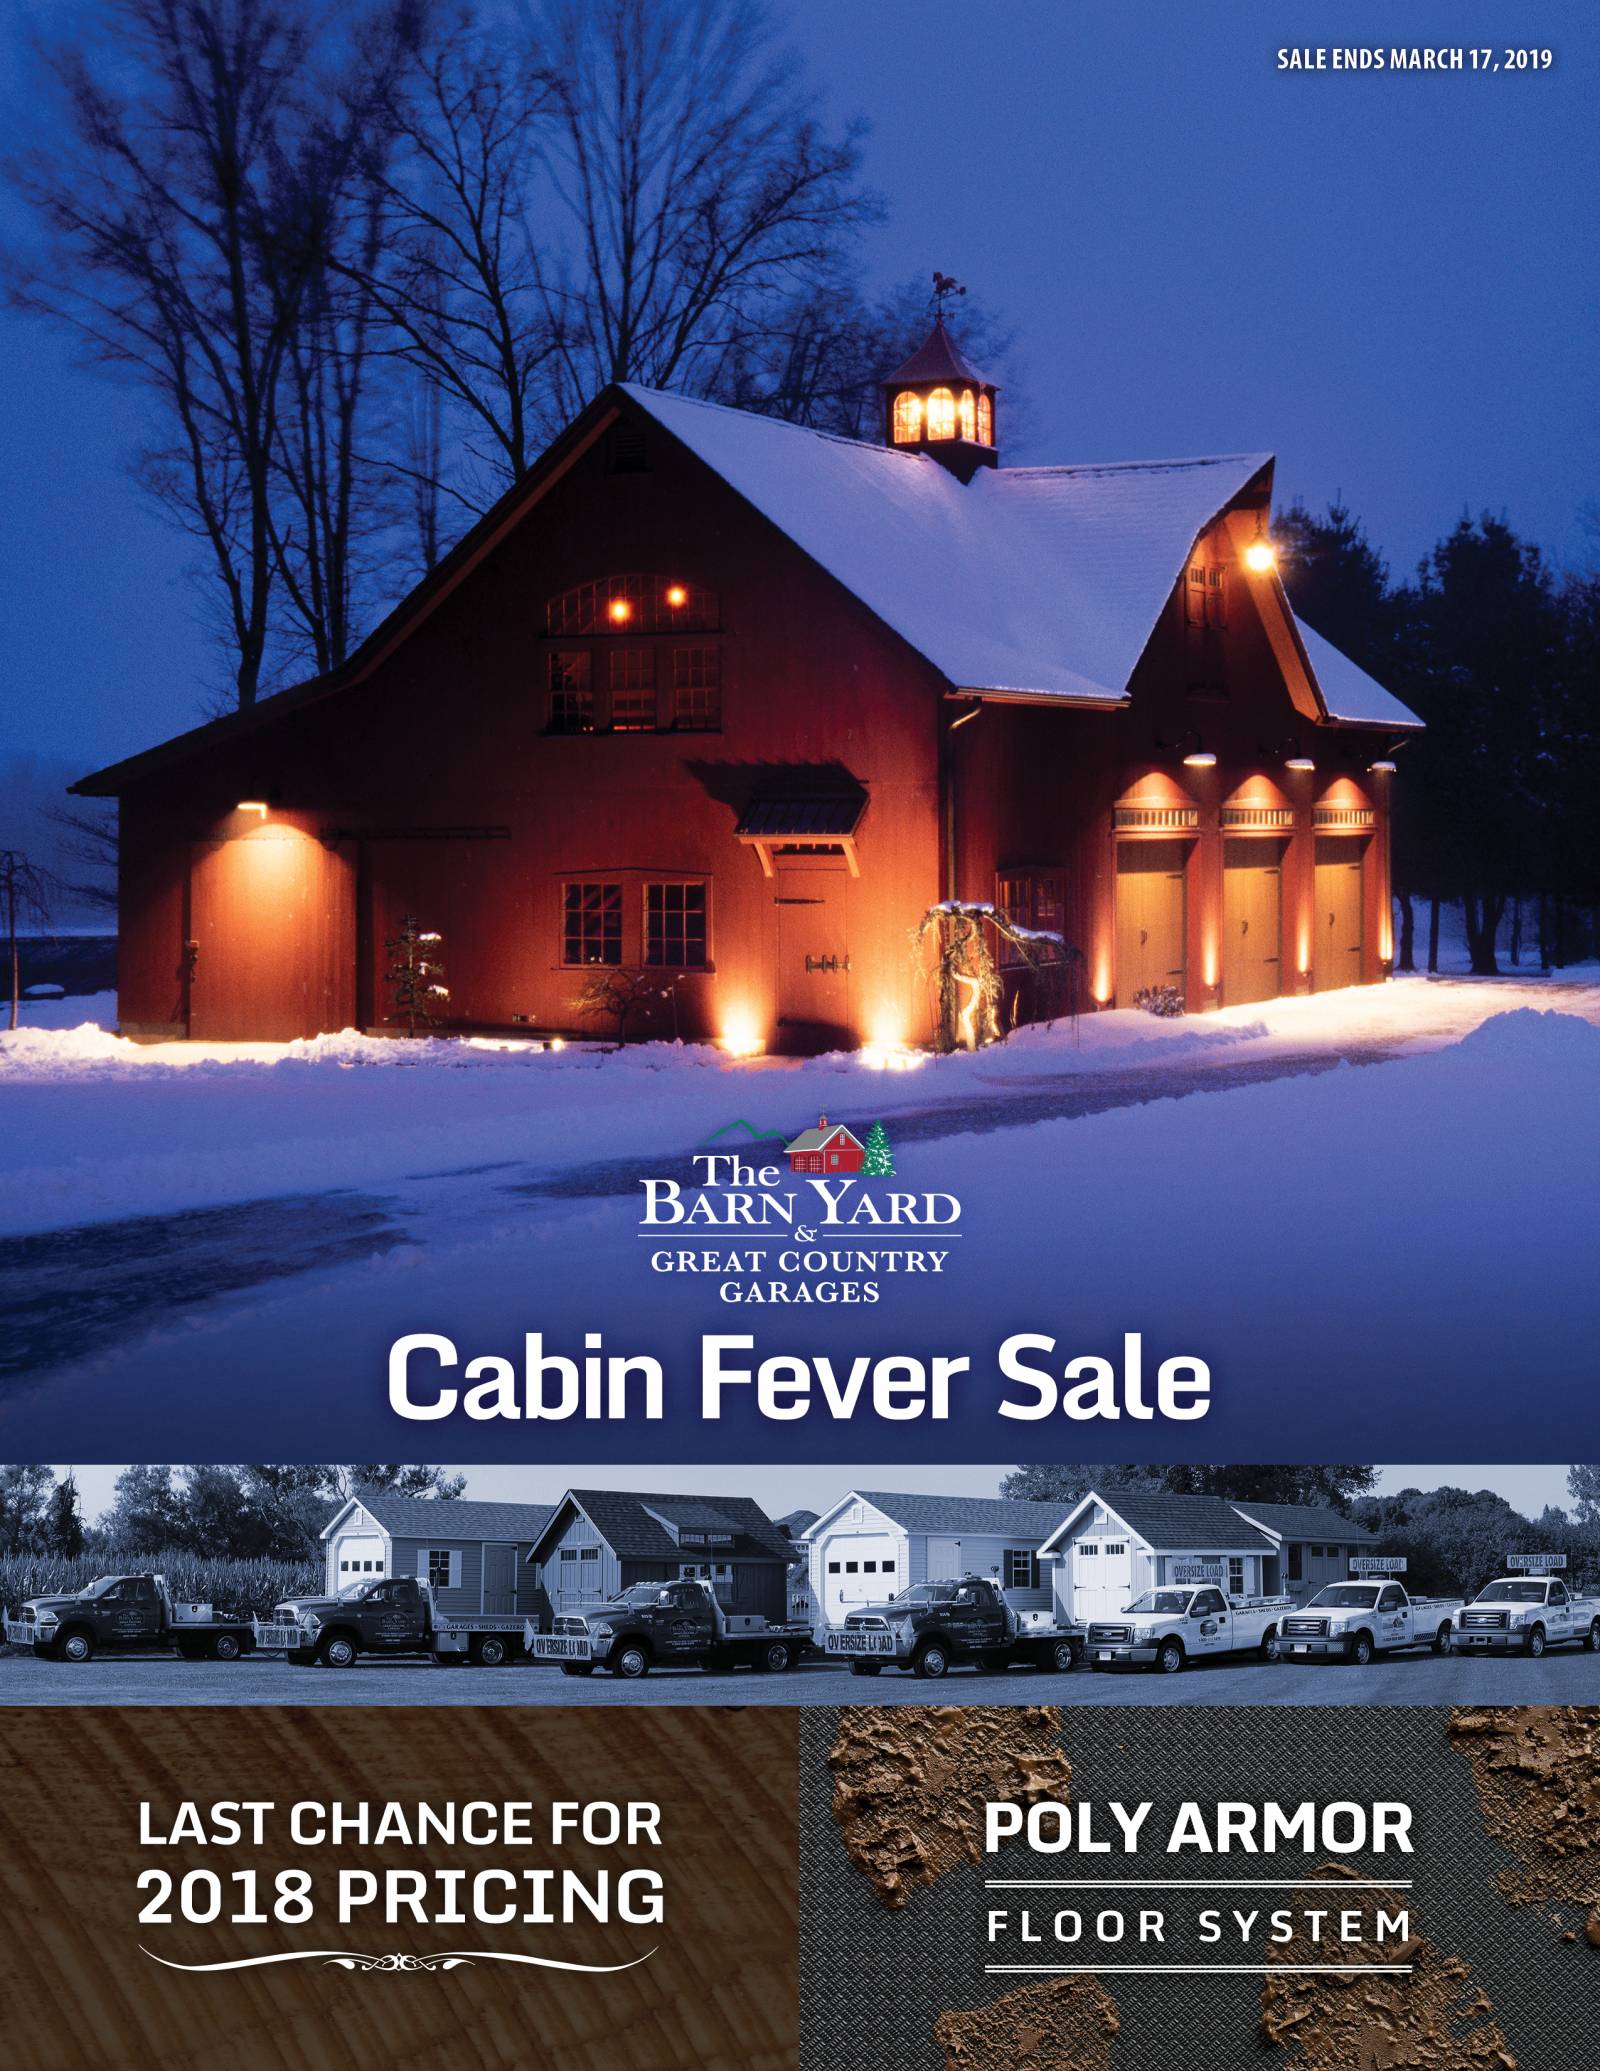 Cabin Fever Sale - Last Chance for 2018 Pricing